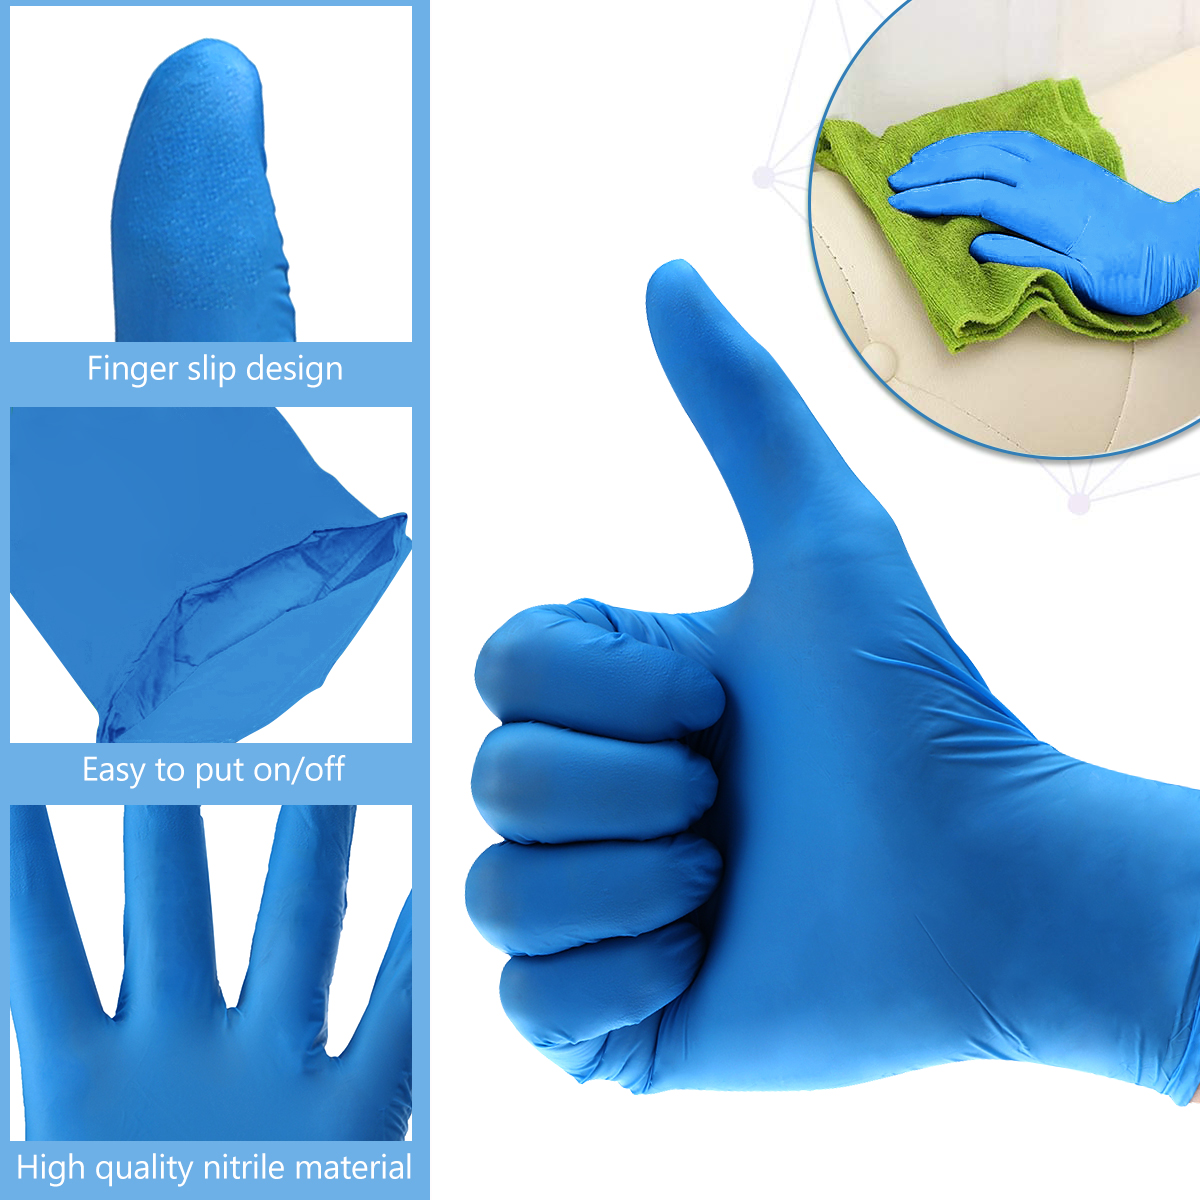 Find 100 Pcs Nitrile Disposable Gloves Powder Free Rubber Latex Free Sterile Gloves for Picnic Food Hygiene House Cleaning for Sale on Gipsybee.com with cryptocurrencies